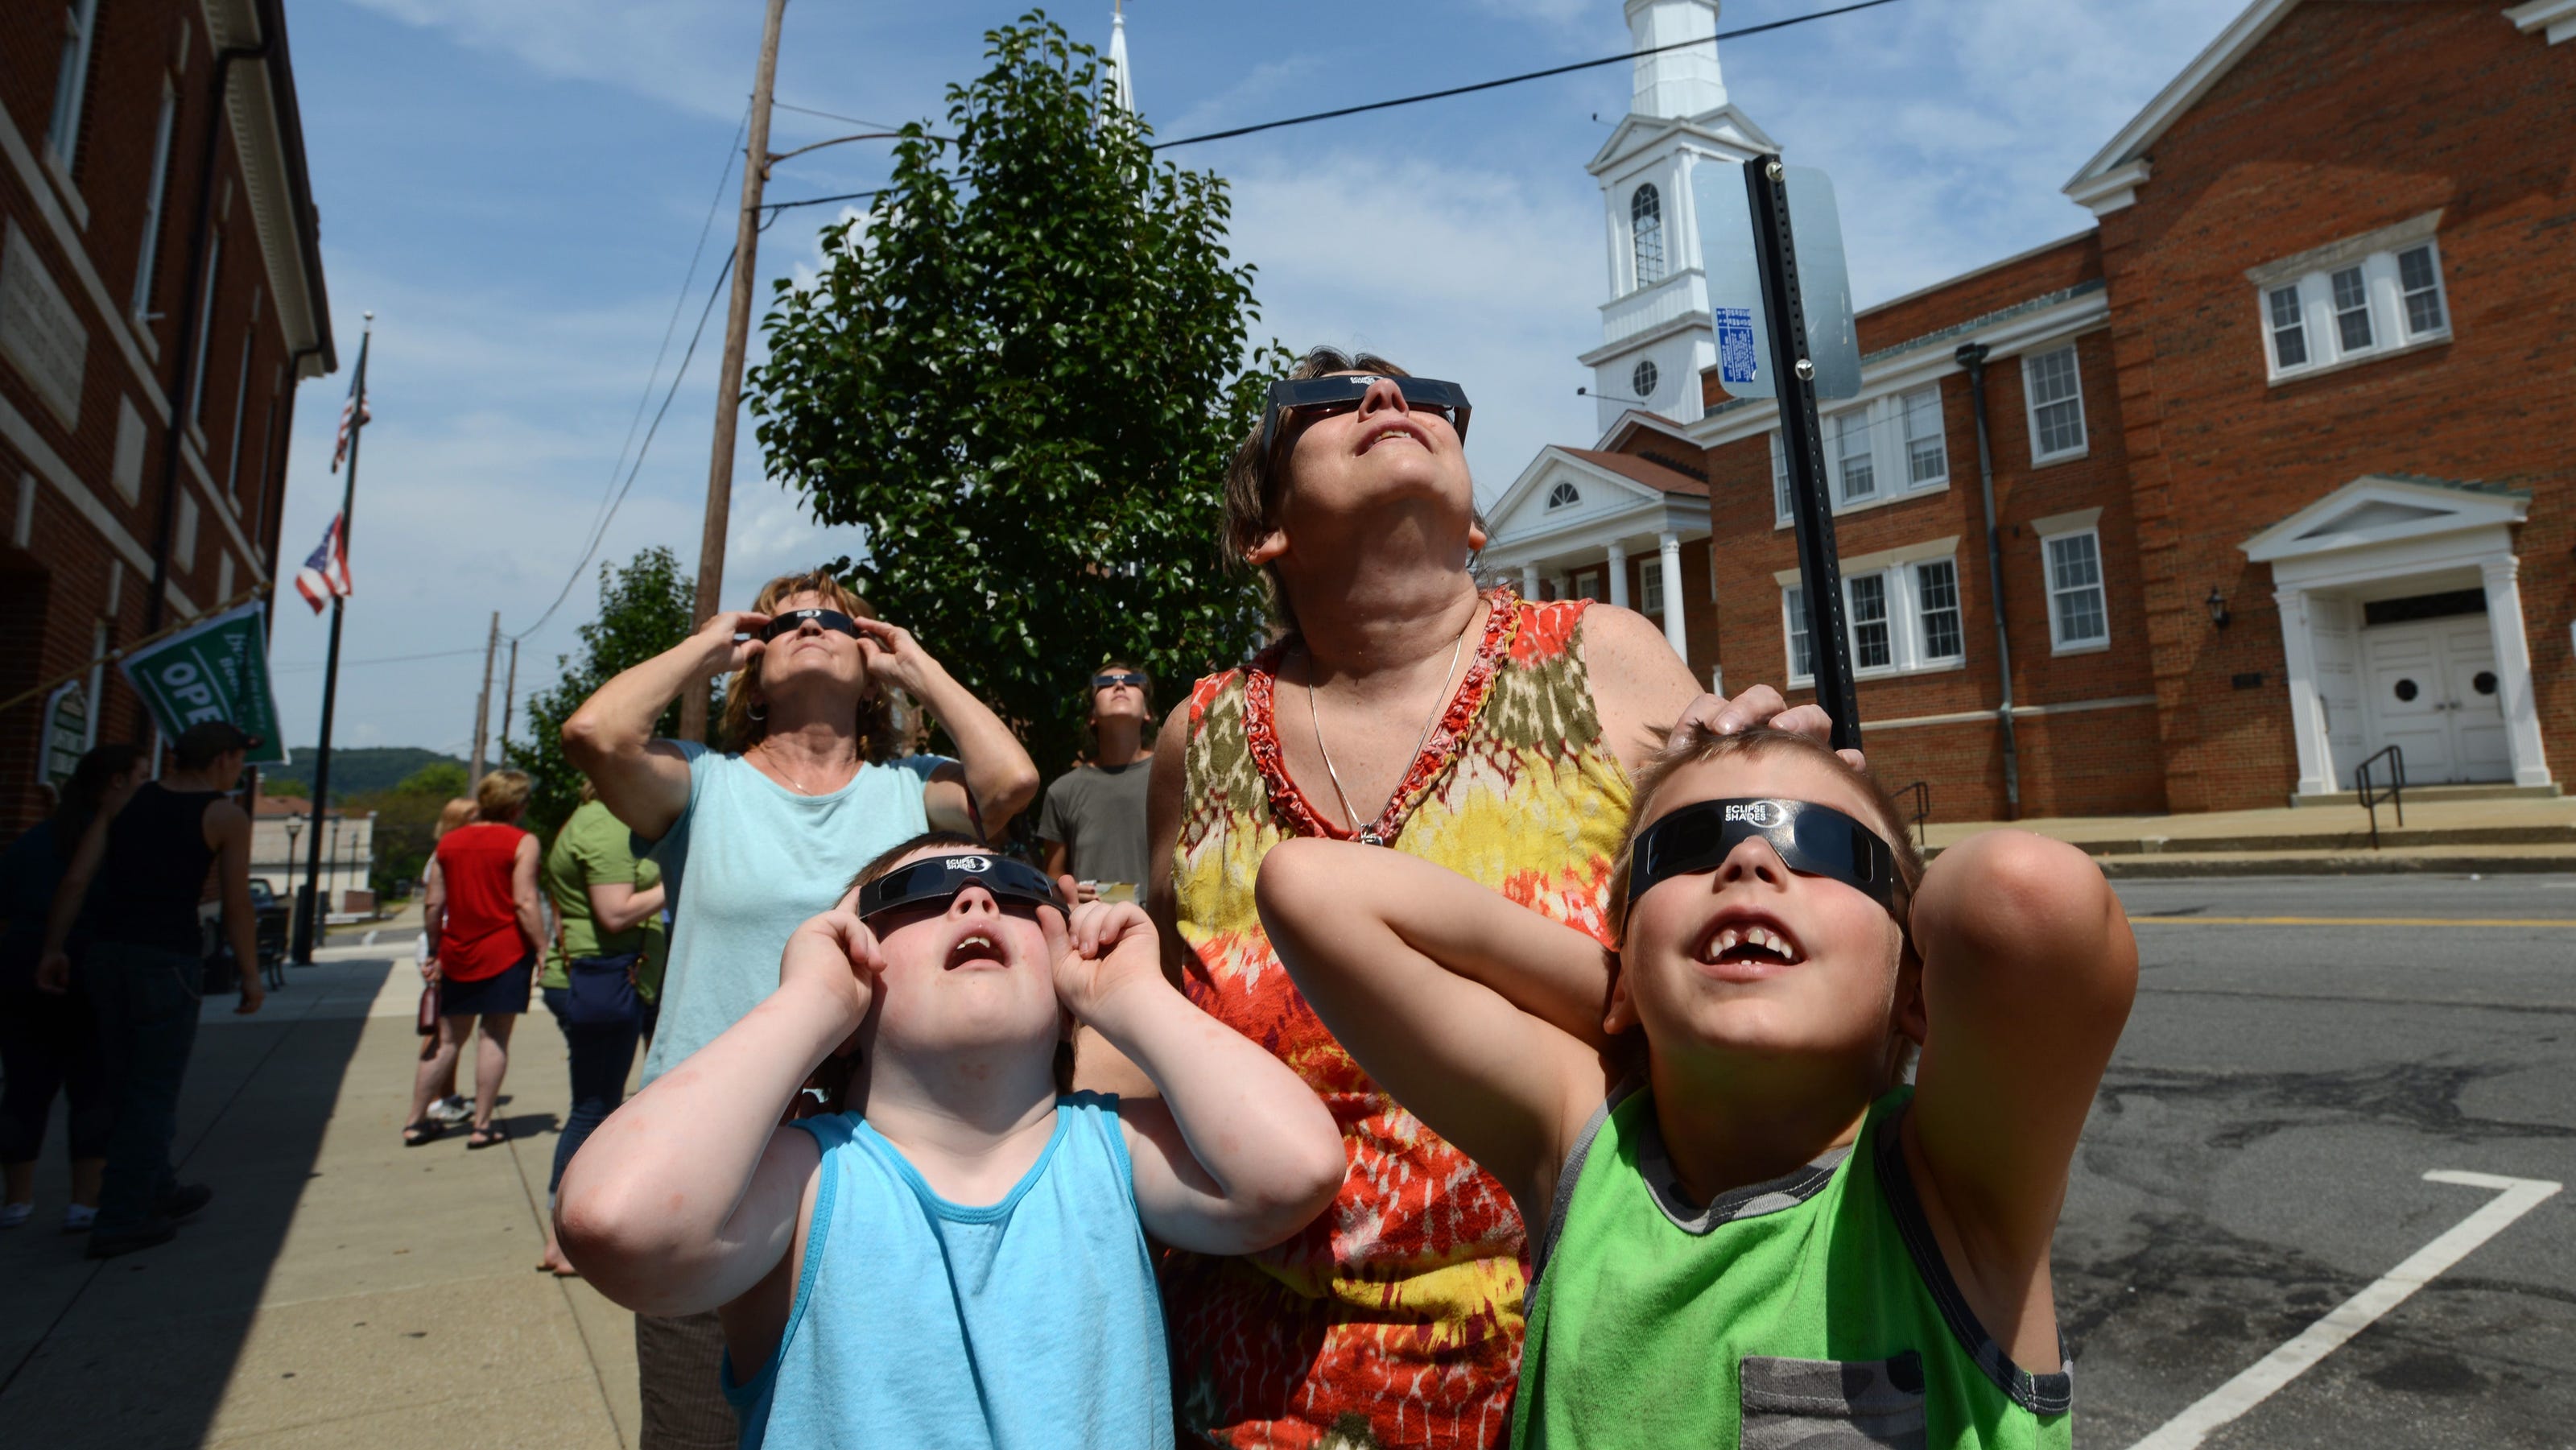  A community under stars: 4 places to enjoy the eclipse in the Springfield area 